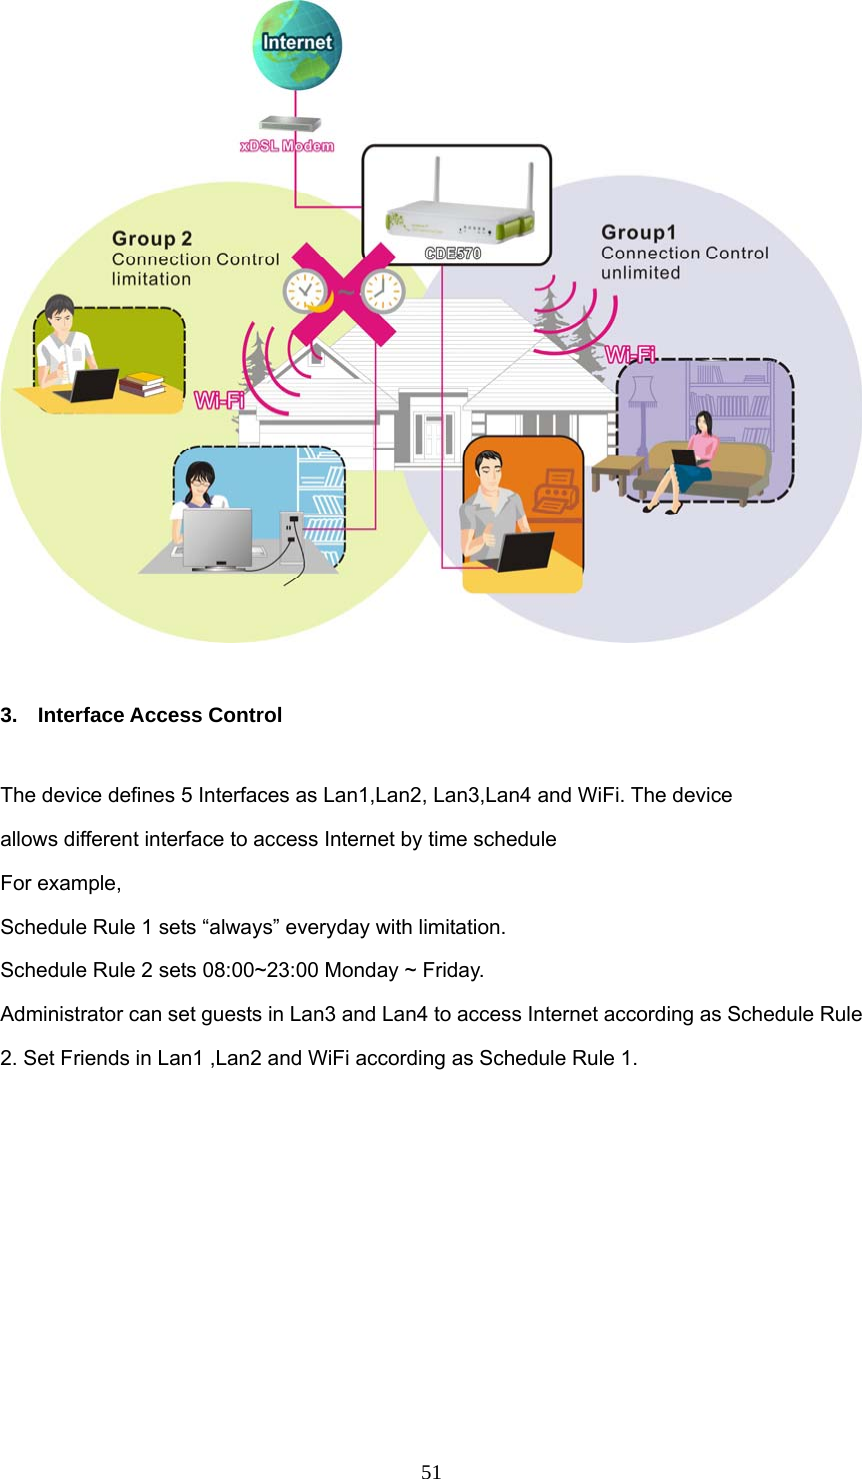  51  3. Interface Access Control  The device defines 5 Interfaces as Lan1,Lan2, Lan3,Lan4 and WiFi. The device allows different interface to access Internet by time schedule For example,   Schedule Rule 1 sets “always” everyday with limitation. Schedule Rule 2 sets 08:00~23:00 Monday ~ Friday. Administrator can set guests in Lan3 and Lan4 to access Internet according as Schedule Rule 2. Set Friends in Lan1 ,Lan2 and WiFi according as Schedule Rule 1. 